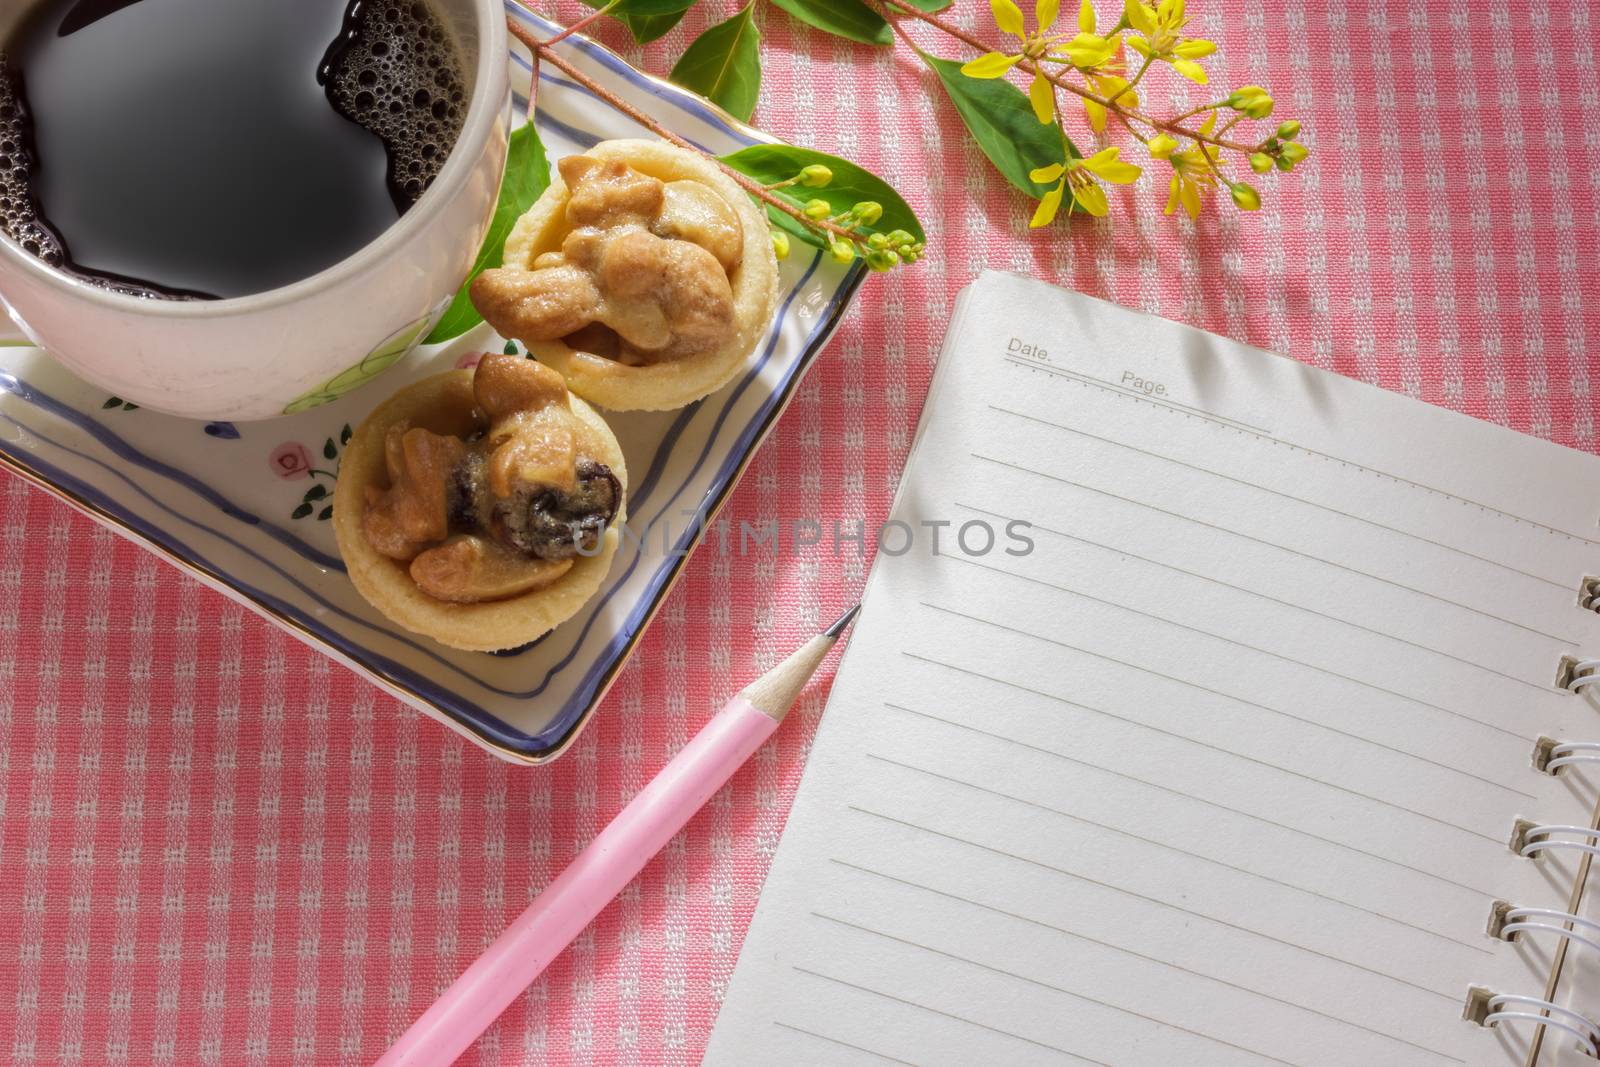 blank notebook on pink cloth table with a cup of coffee and dessert.